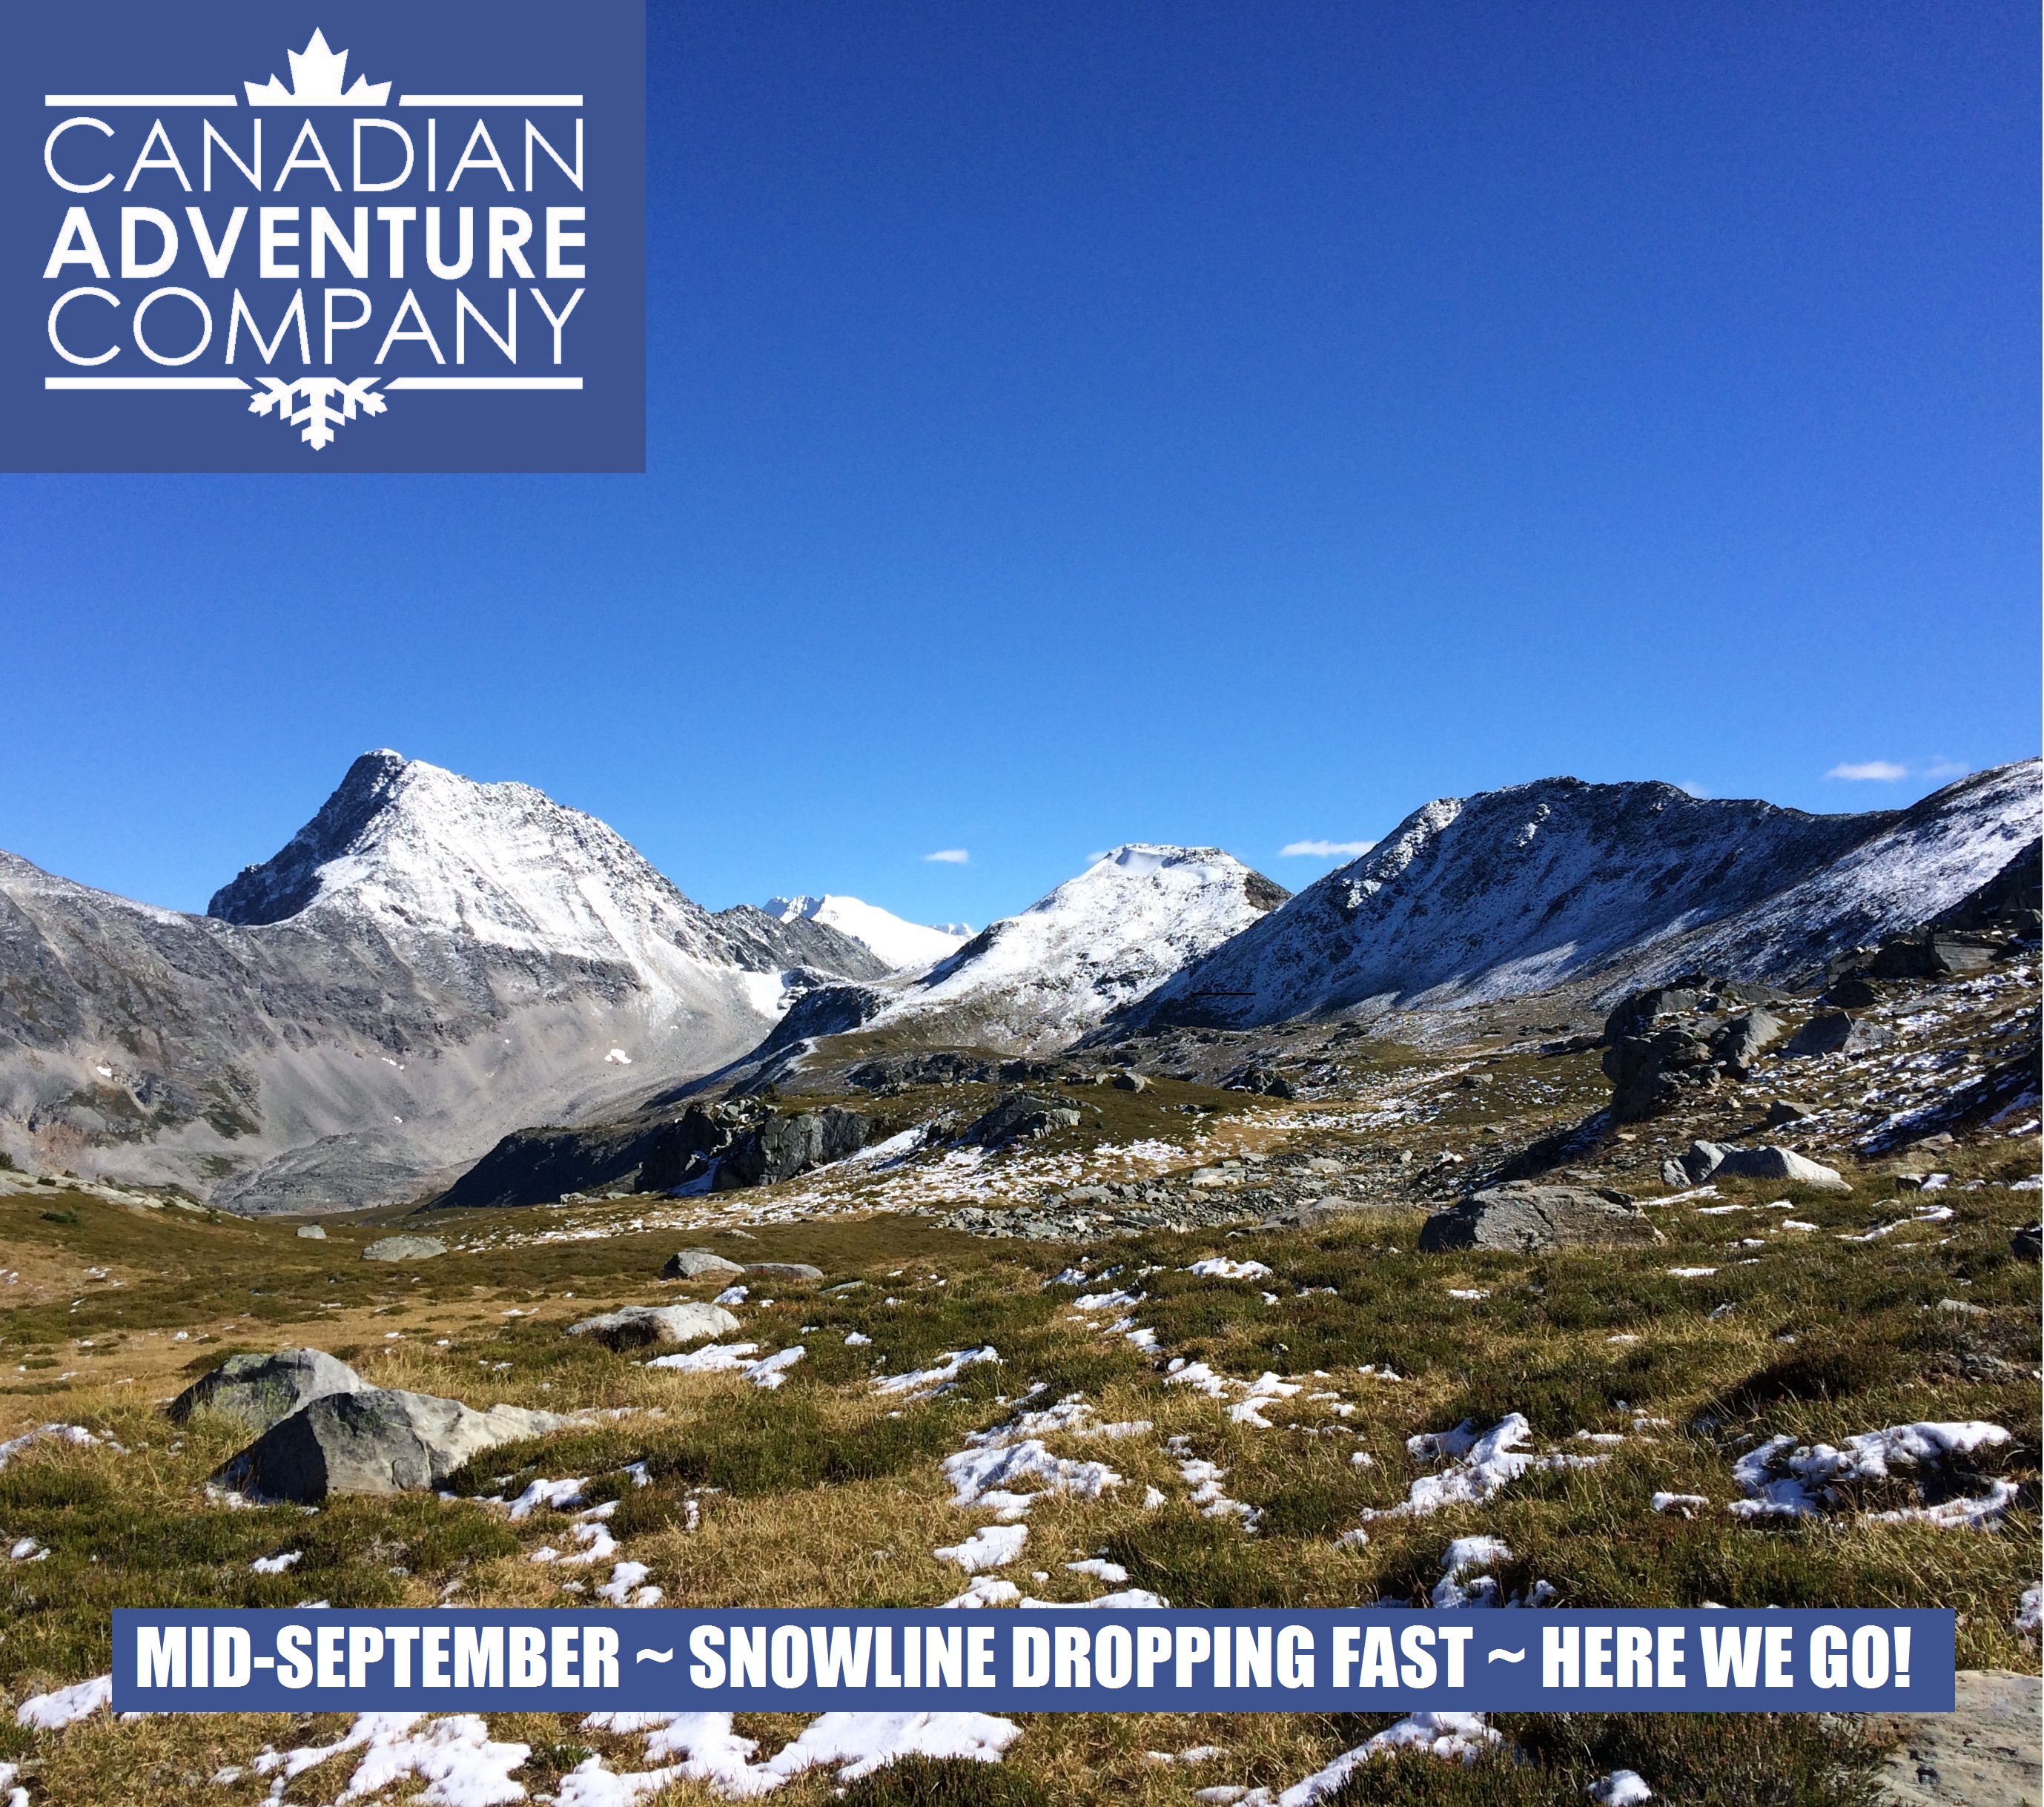 Mallard Mountain Lodge Snowline dropping fast ~ here we go for another winter!